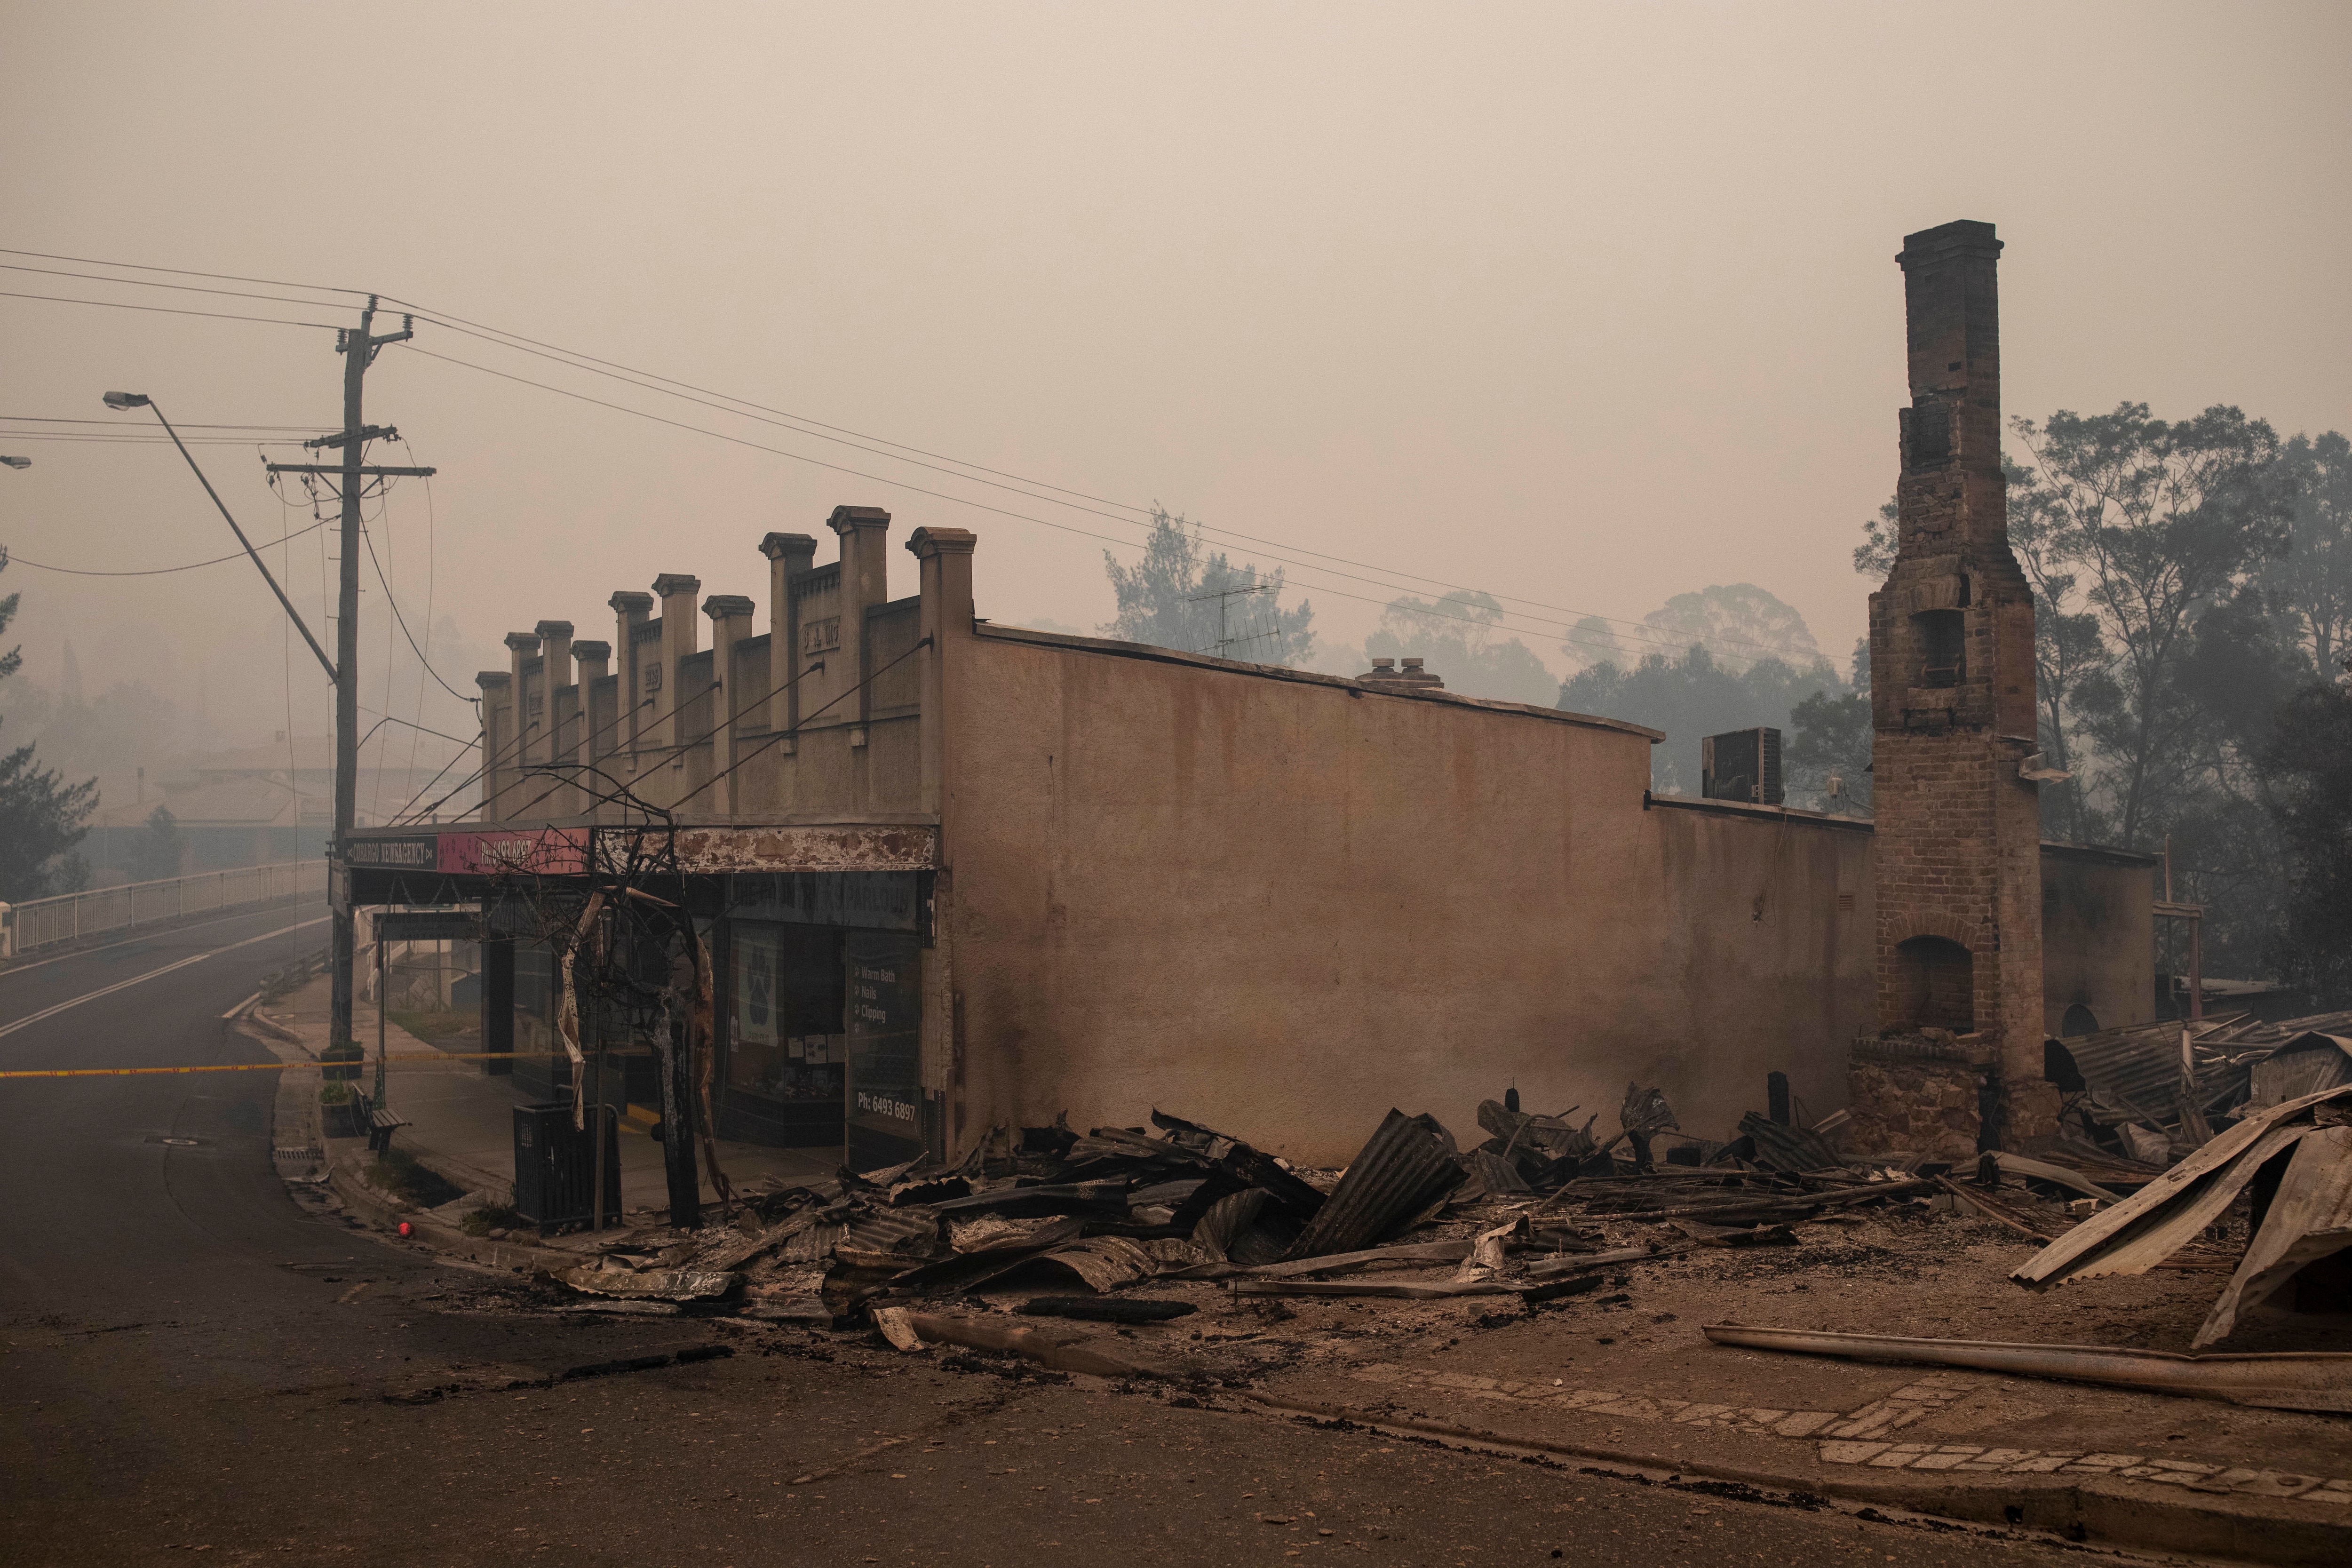 Destroyed buildings are seen in Cobargo, NSW, Wednesday, January 1, 2020. Several bushfire-ravaged communities in NSW have greeted the new year under immediate threat. (AAP Image/Sean Davey) NO ARCHIVING